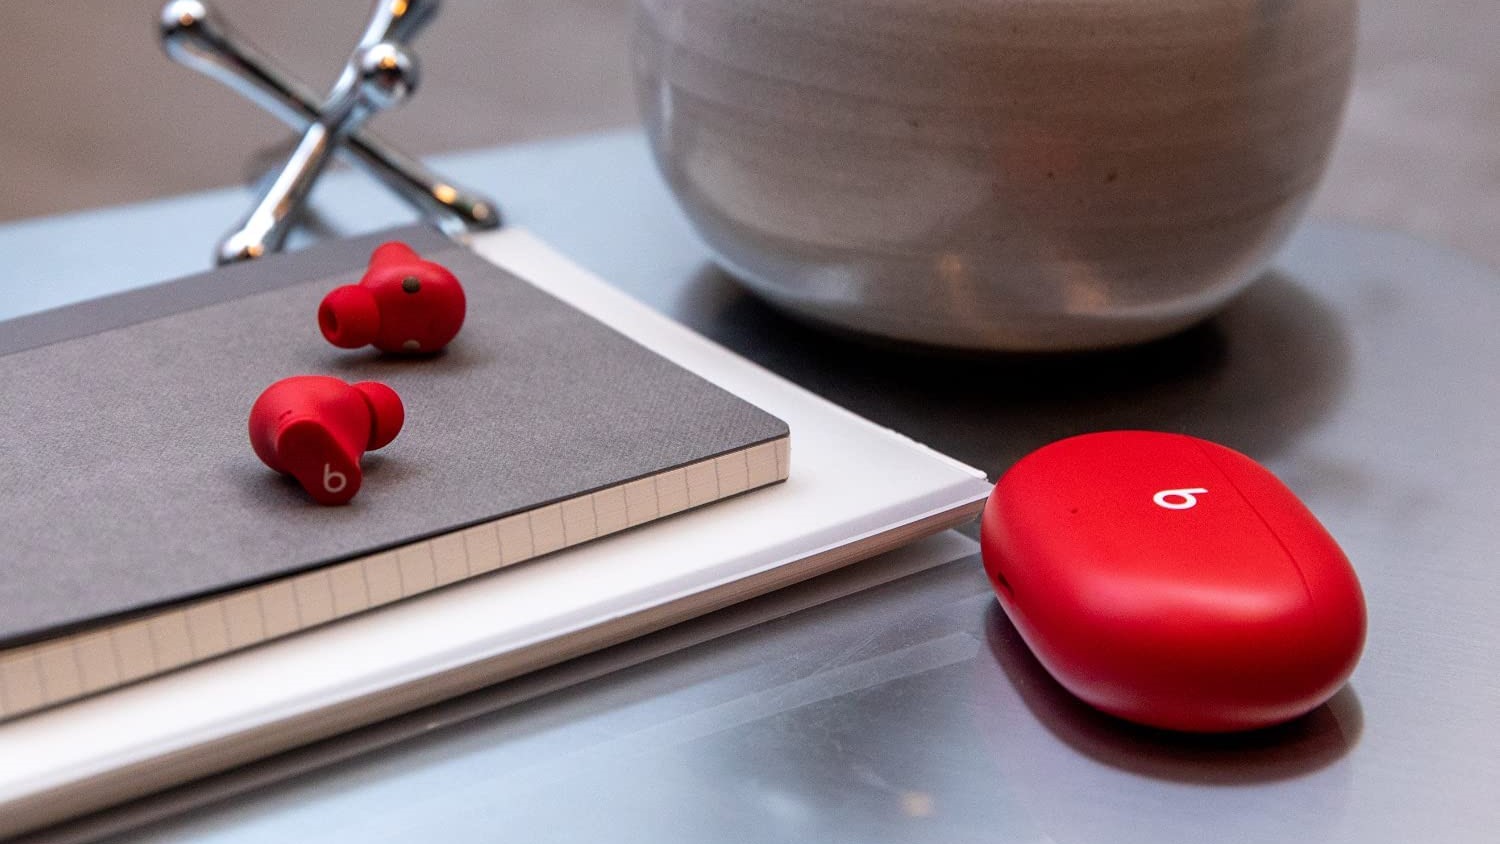 Beats earbuds on table